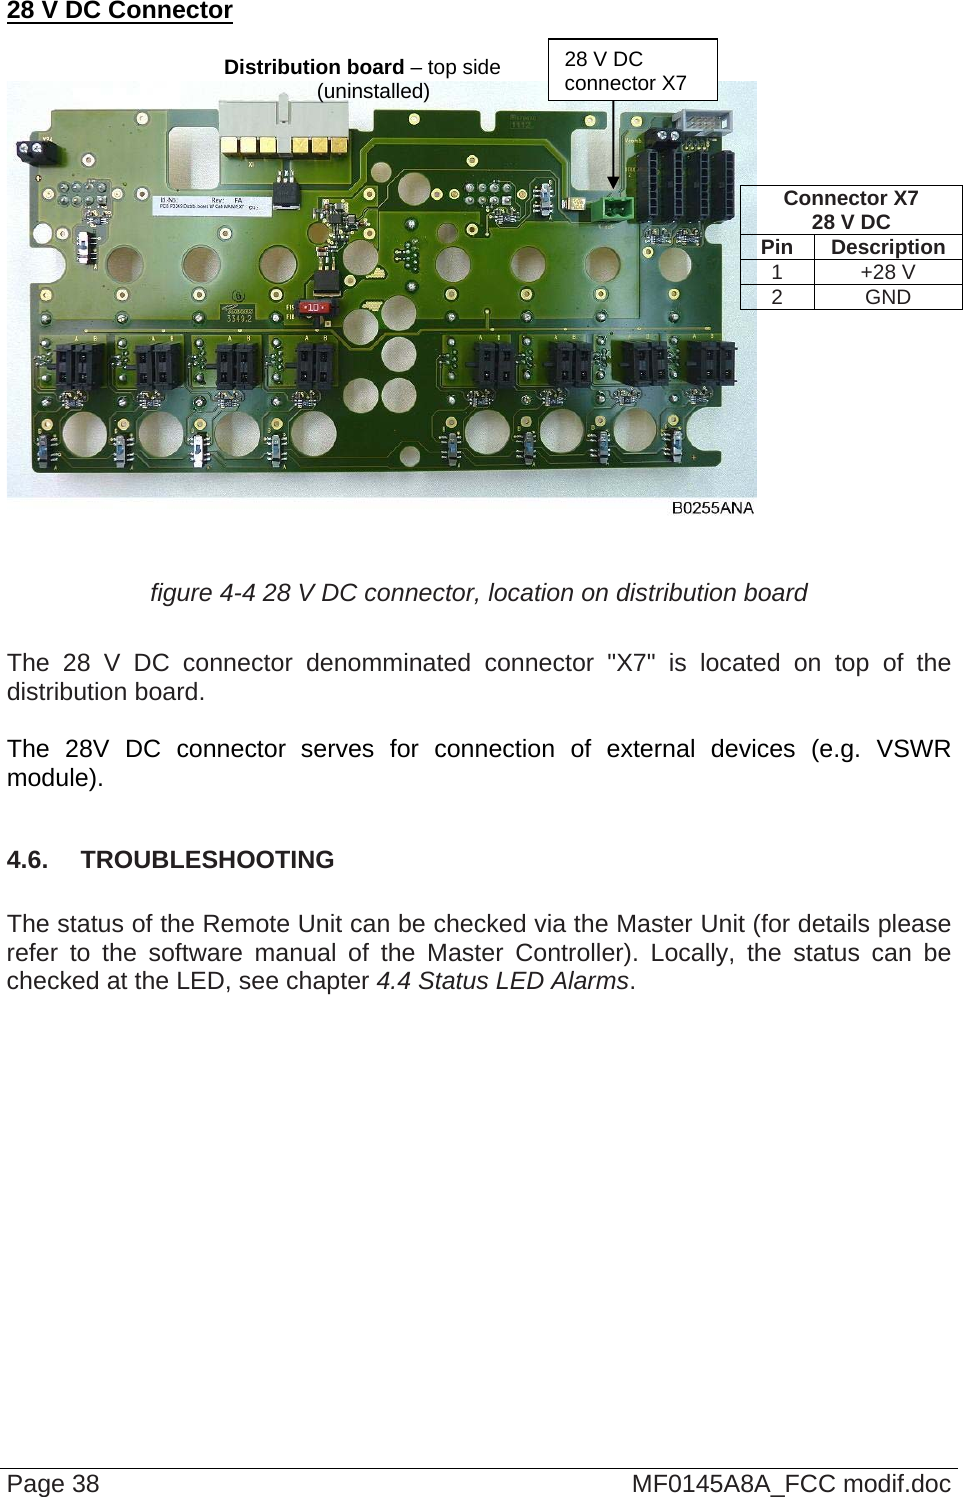  28 V DC Connector   Page 38  MF0145A8A_FCC modif.doc     figure 4-4 28 V DC connector, location on distribution board  The 28 V DC connector denomminated connector &quot;X7&quot; is located on top of the distribution board.  The 28V DC connector serves for connection of external devices (e.g. VSWR module).  4.6.  TROUBLESHOOTING  The status of the Remote Unit can be checked via the Master Unit (for details please refer to the software manual of the Master Controller). Locally, the status can be checked at the LED, see chapter 4.4 Status LED Alarms.   Connector X7 28 V DC Pin Description 1 +28 V 2 GND 28 V DC  connector X7Distribution board – top side (uninstalled) 